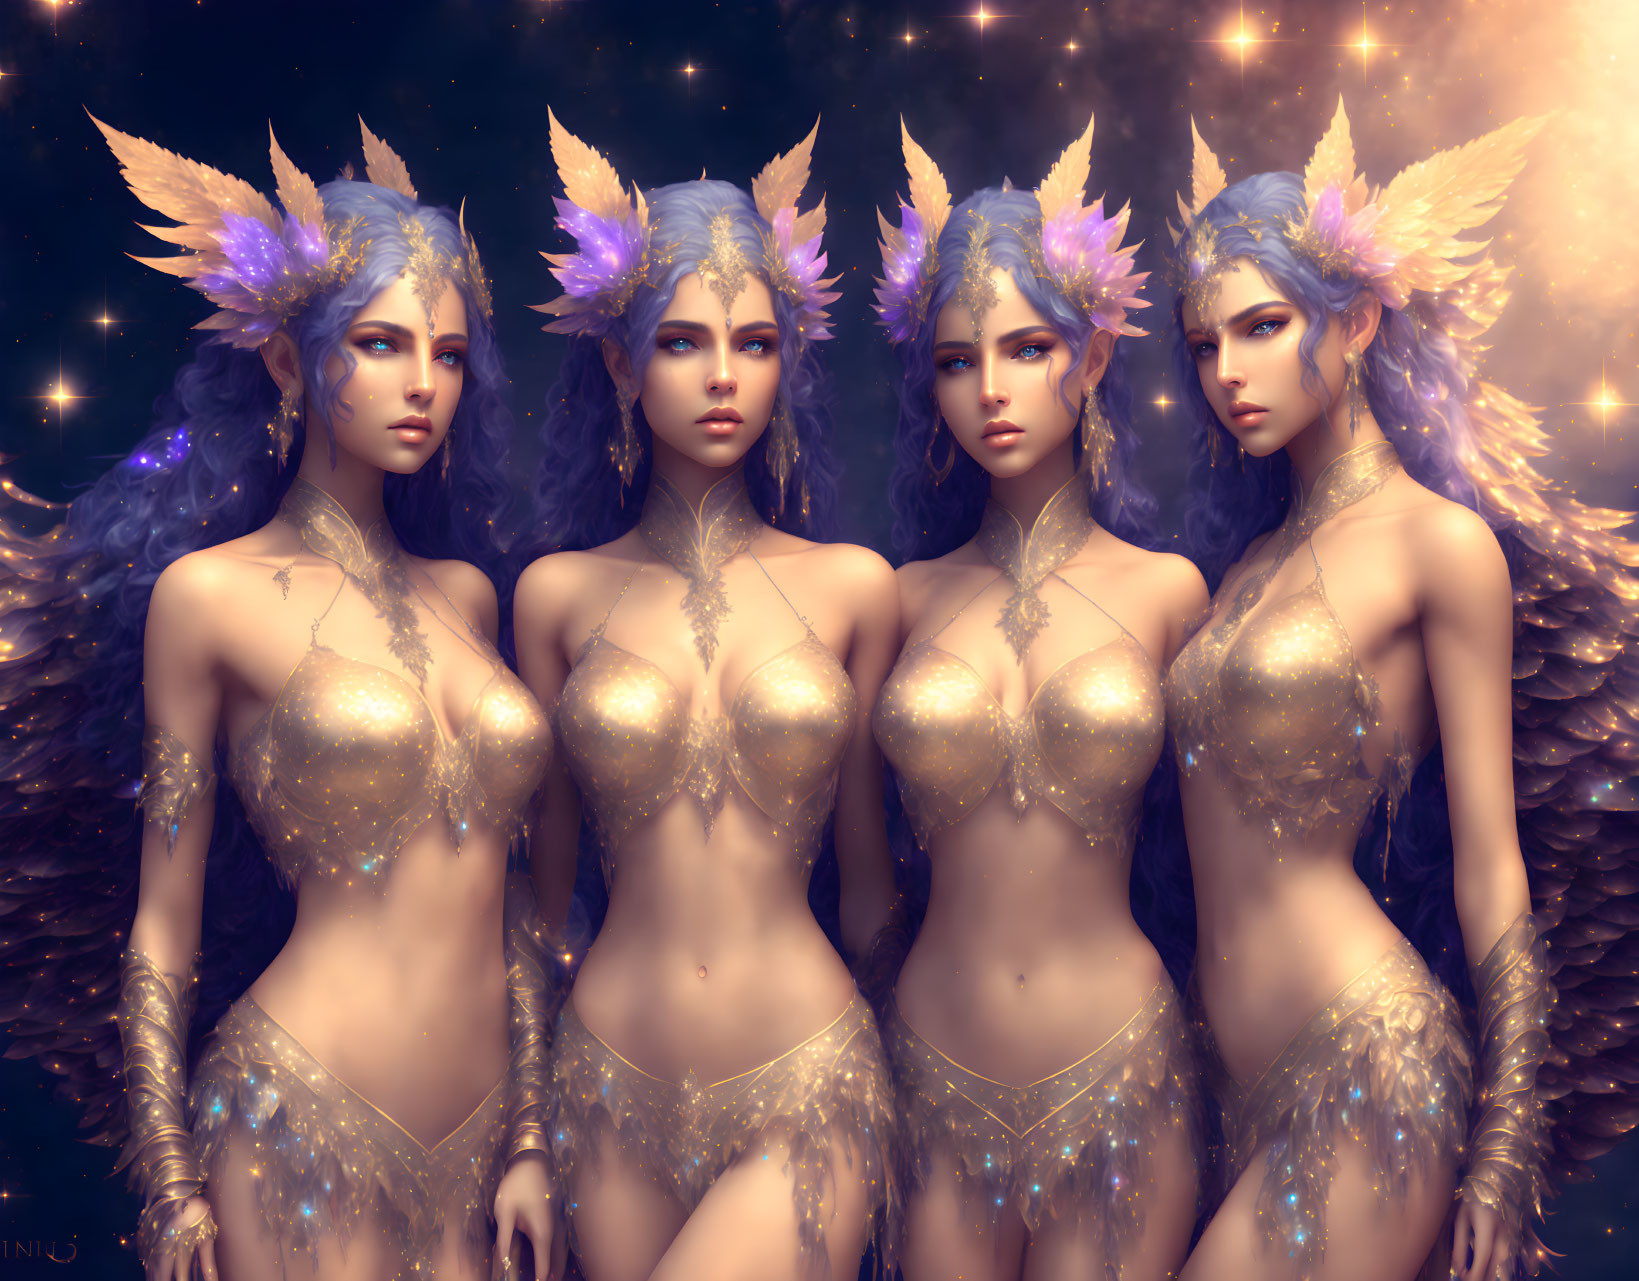 (most of) The Pleiades